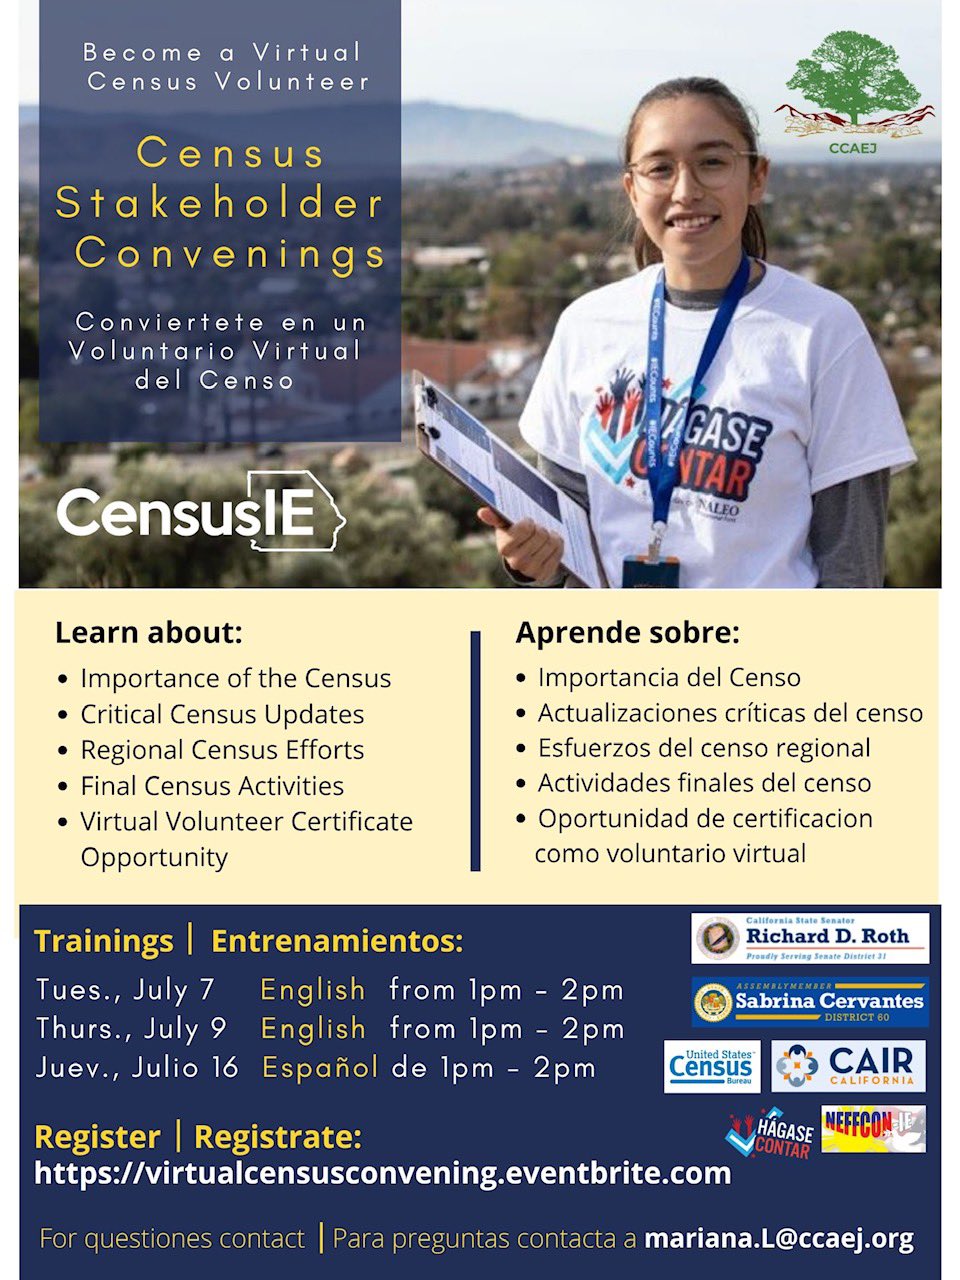 Census Stakeholder Convenings